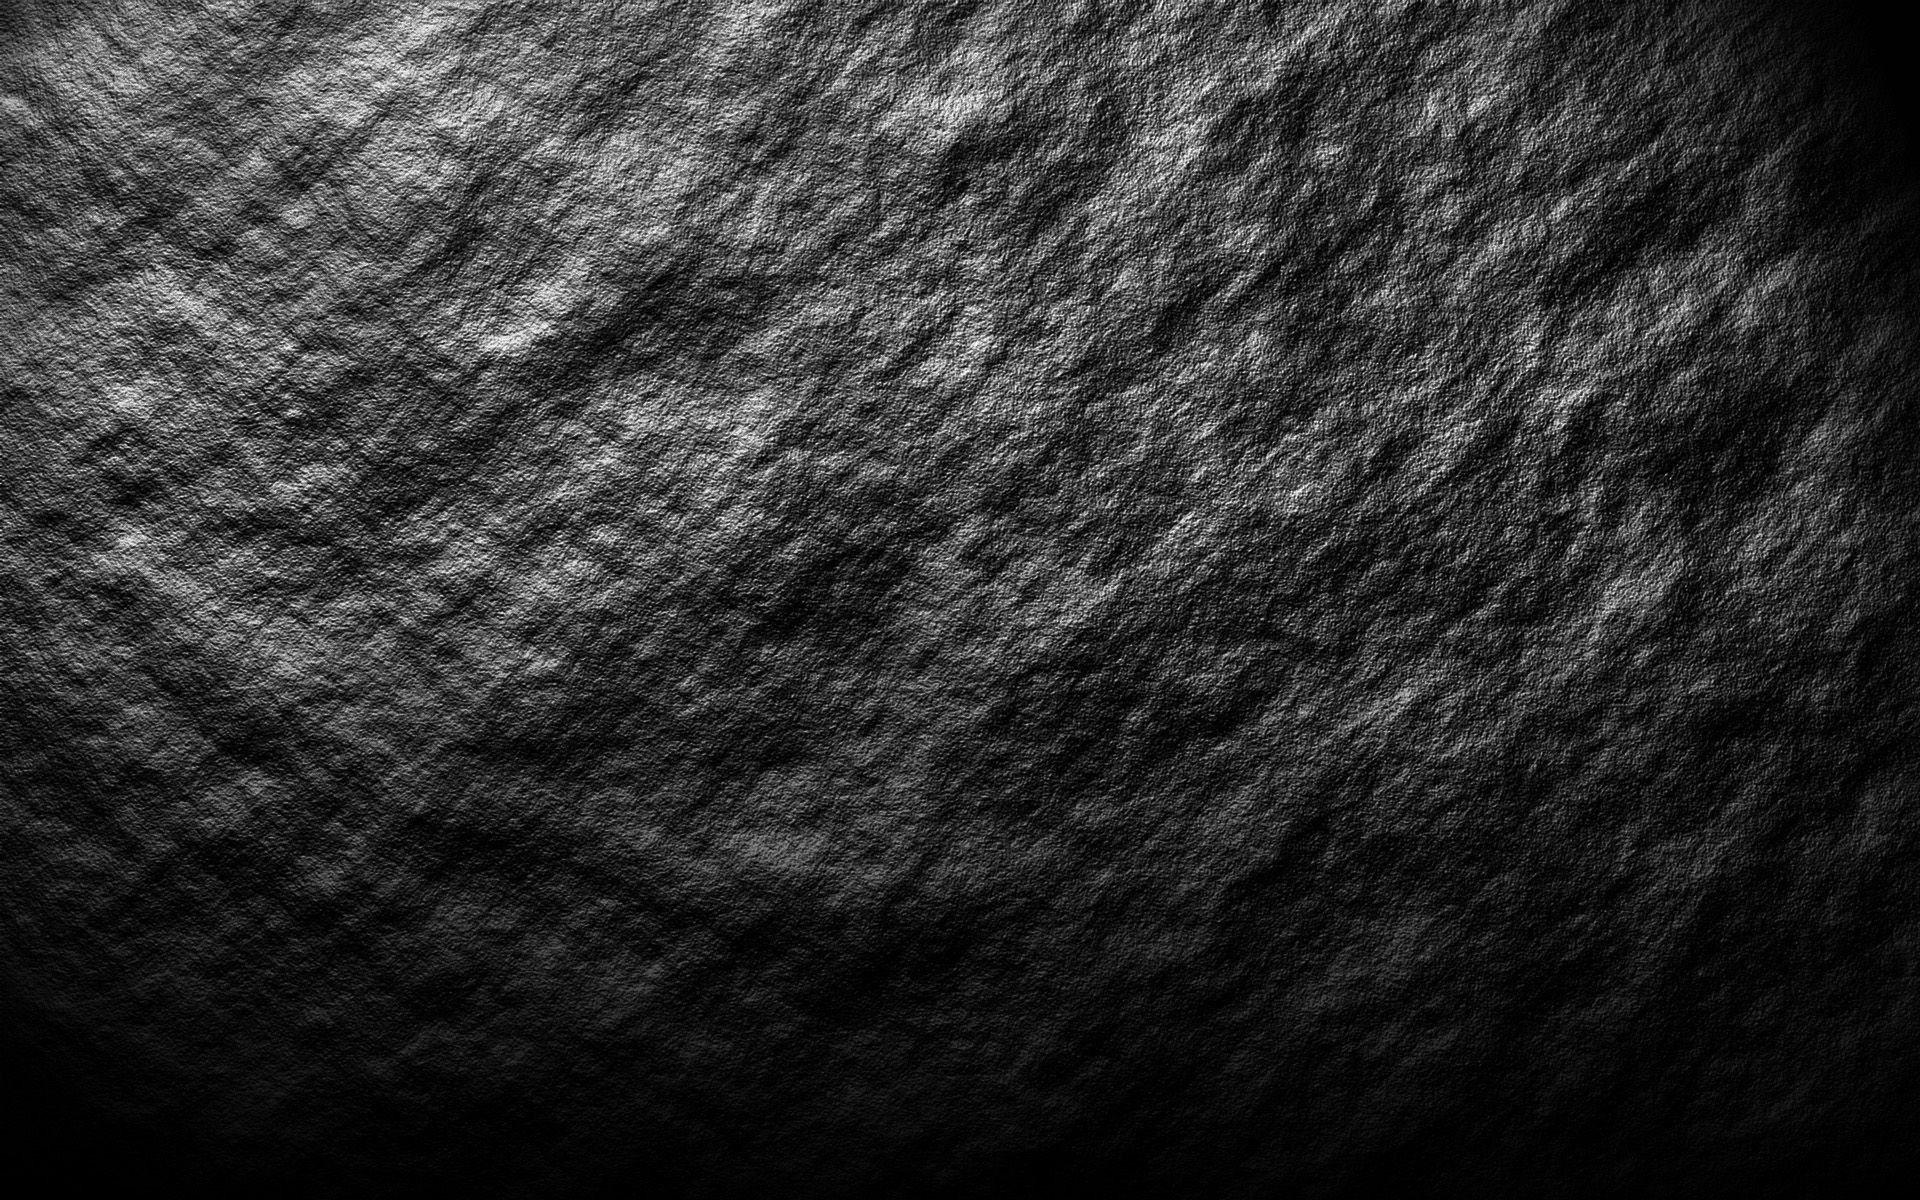 Download wallpaper black stone texture, macro, black rocks, black grunge background, black stones, stone background, black stone, stone textures, black background for desktop with resolution 1920x1200. High Quality HD picture wallpaper